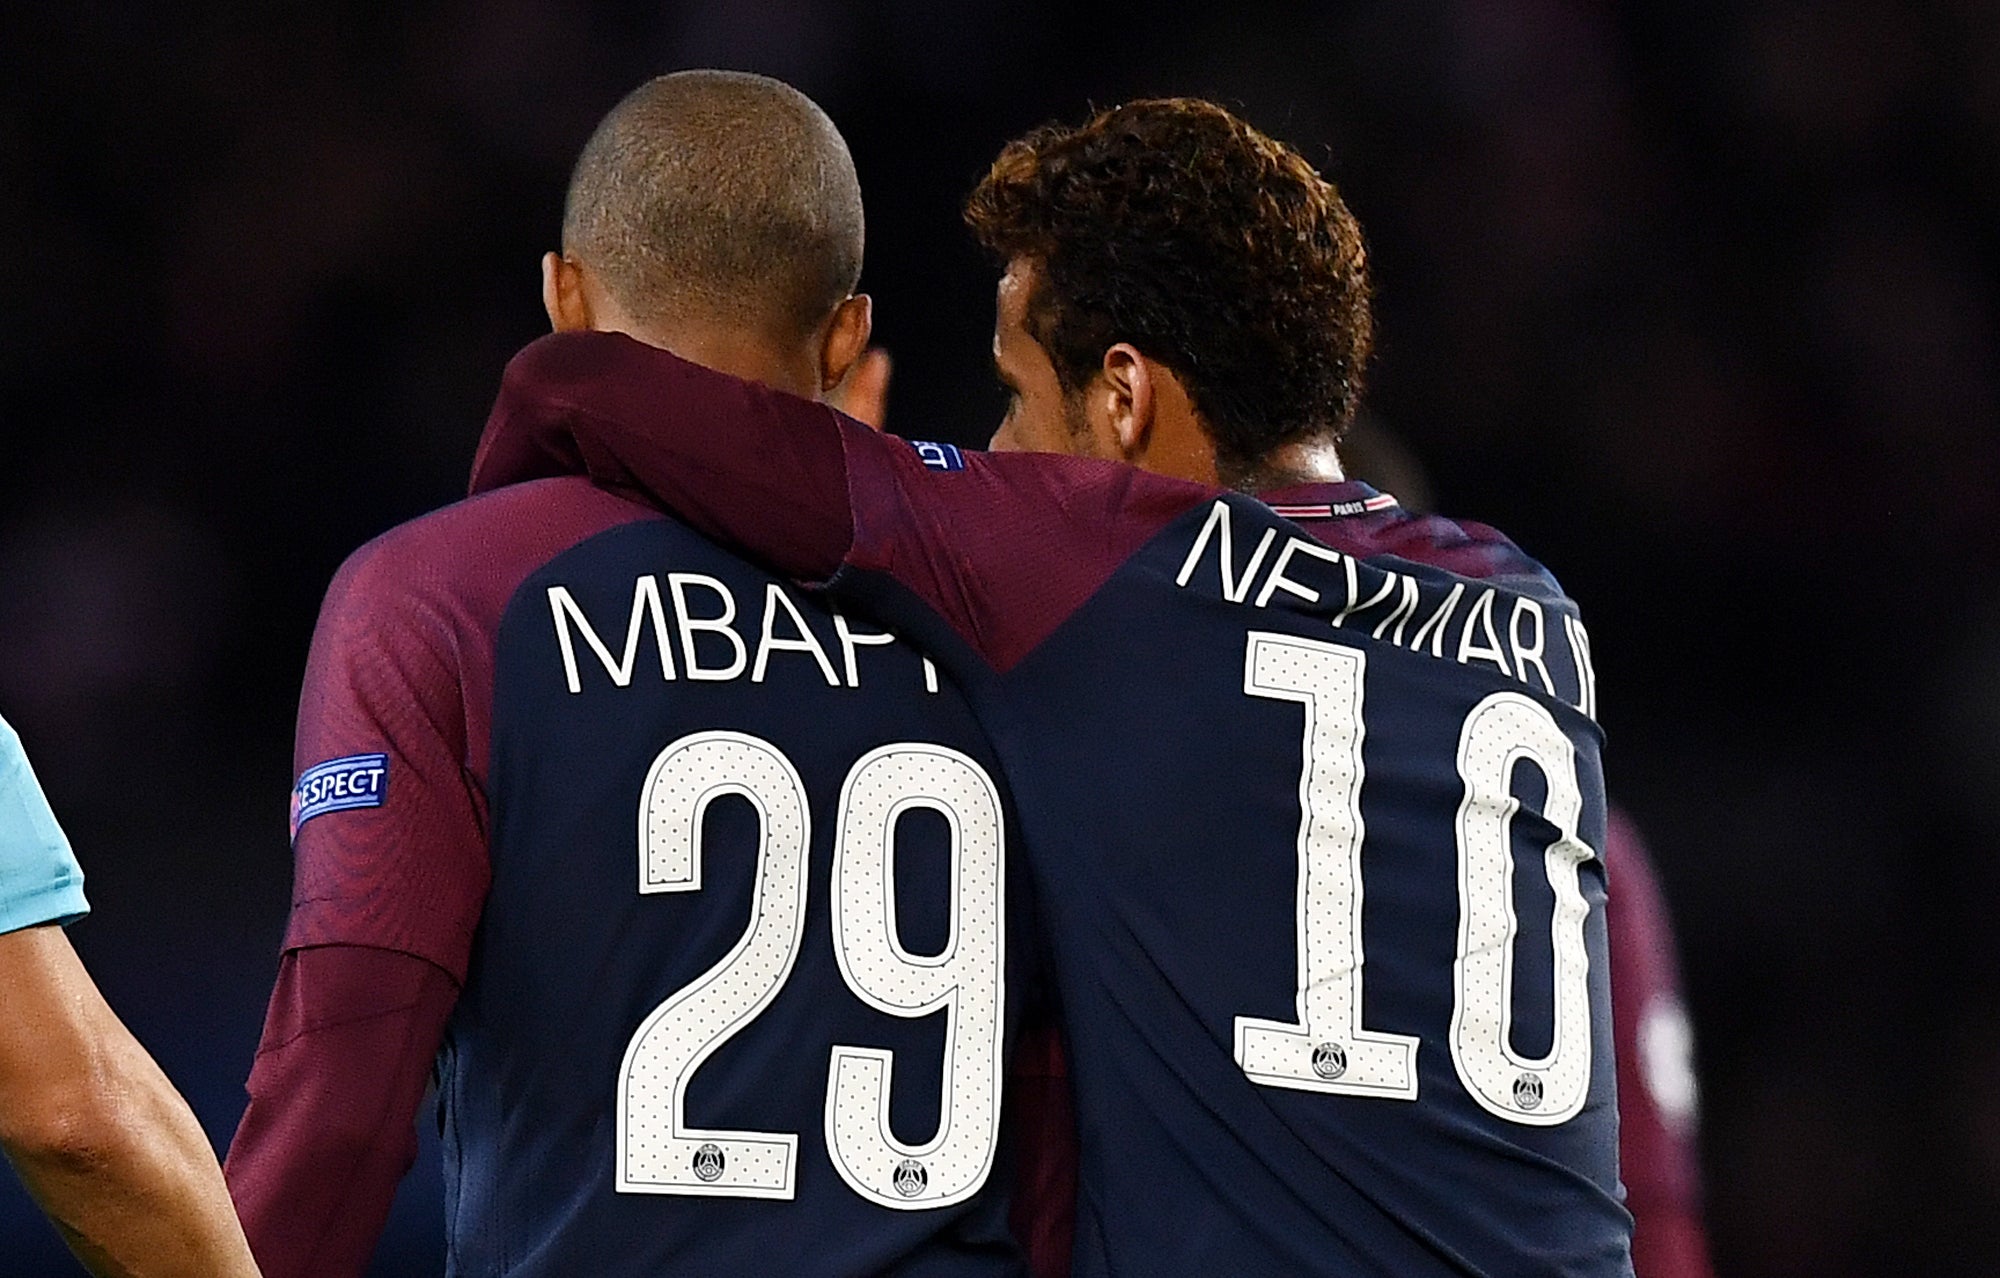 Kylian Mbappe and Neymar will lead PSG this summer